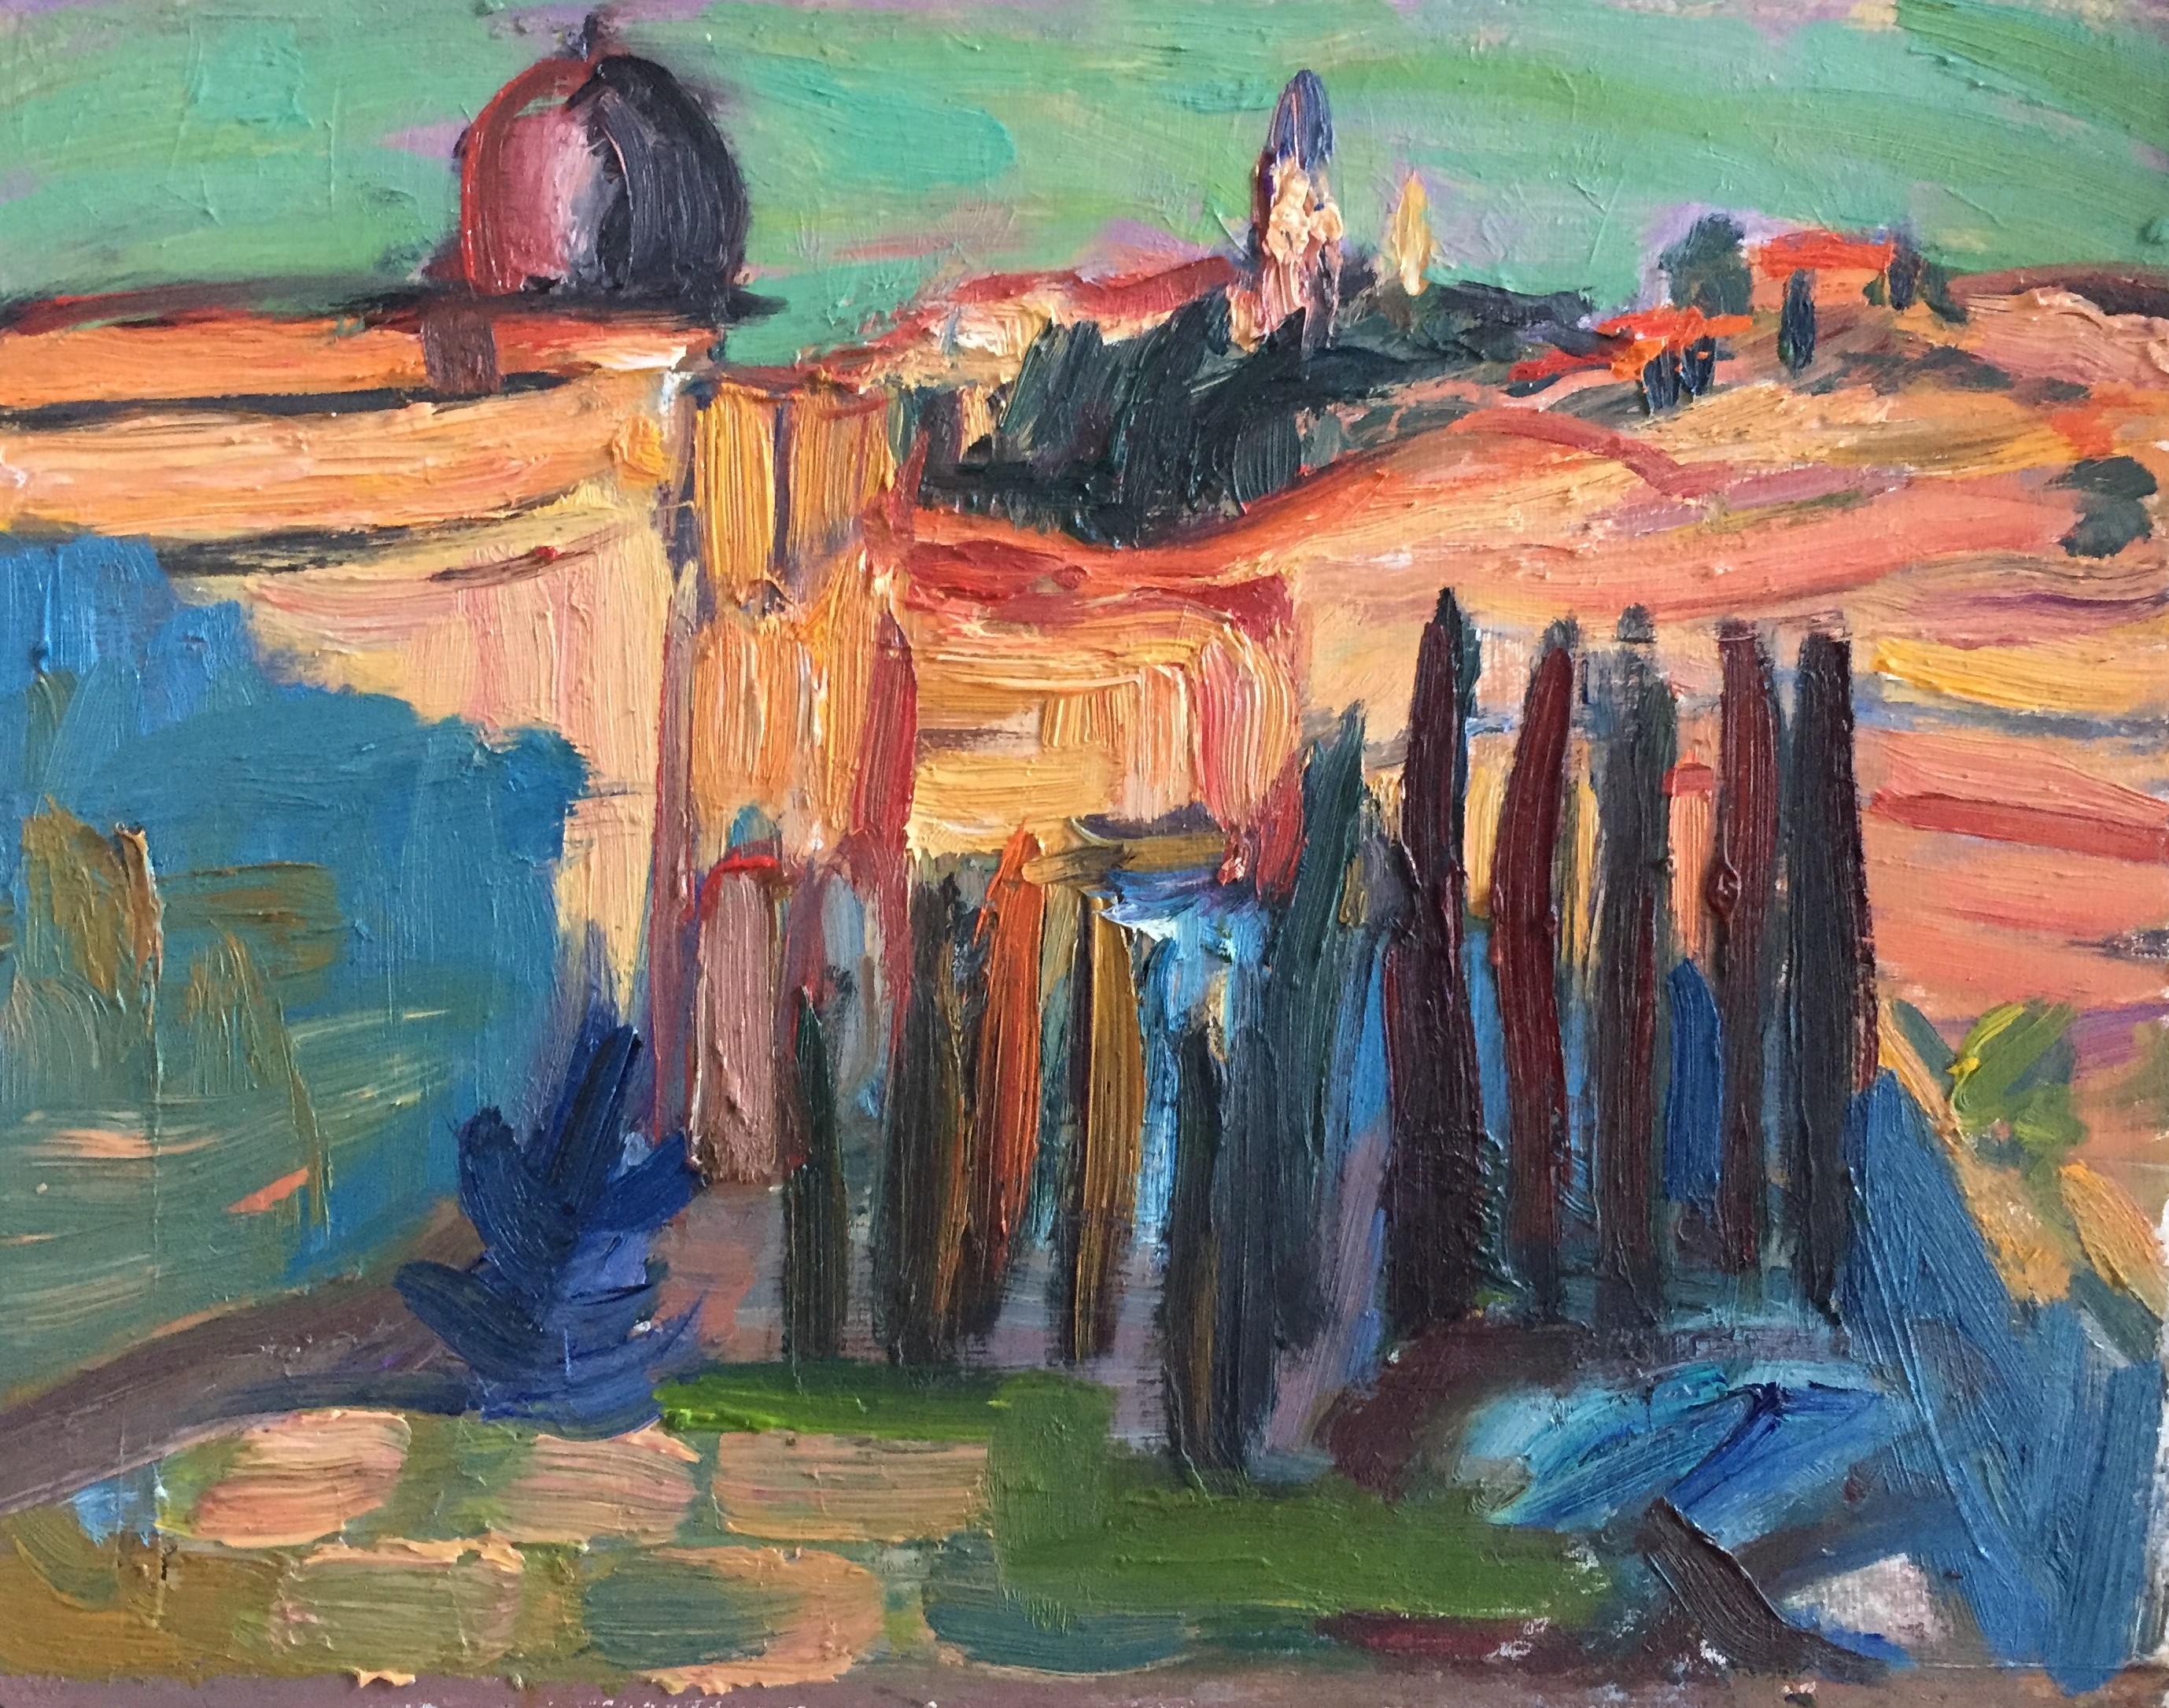 Jerusalem; Mount of Olives from the Western Wall - Oil on Board  26 x 20 cm  